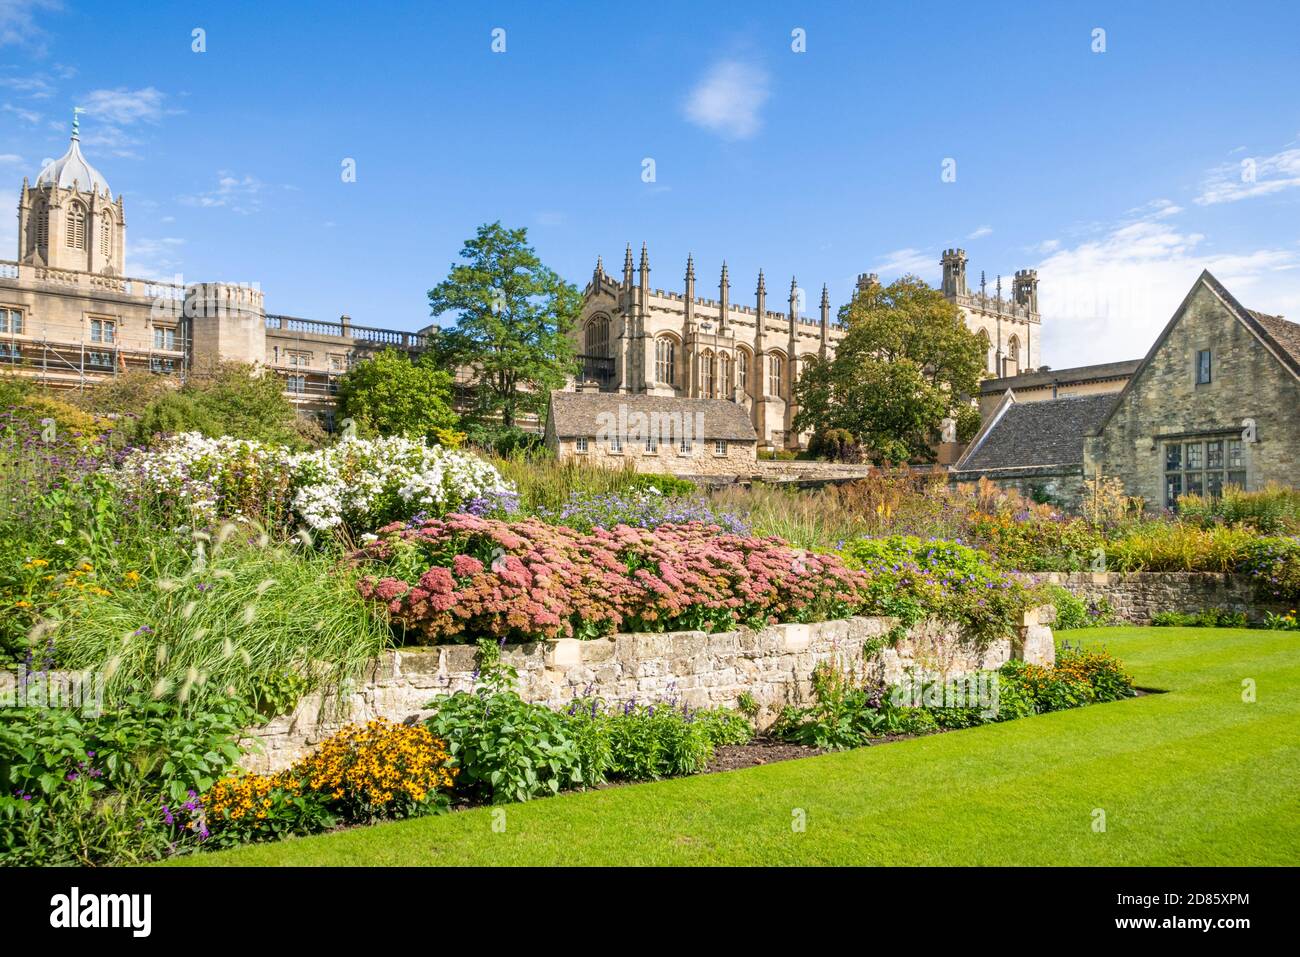 Oxford University Christ Church Cathedral and Memorial Garden Christ Church College Oxford from Broad Walk Oxford Oxfordshire England GB Banque D'Images